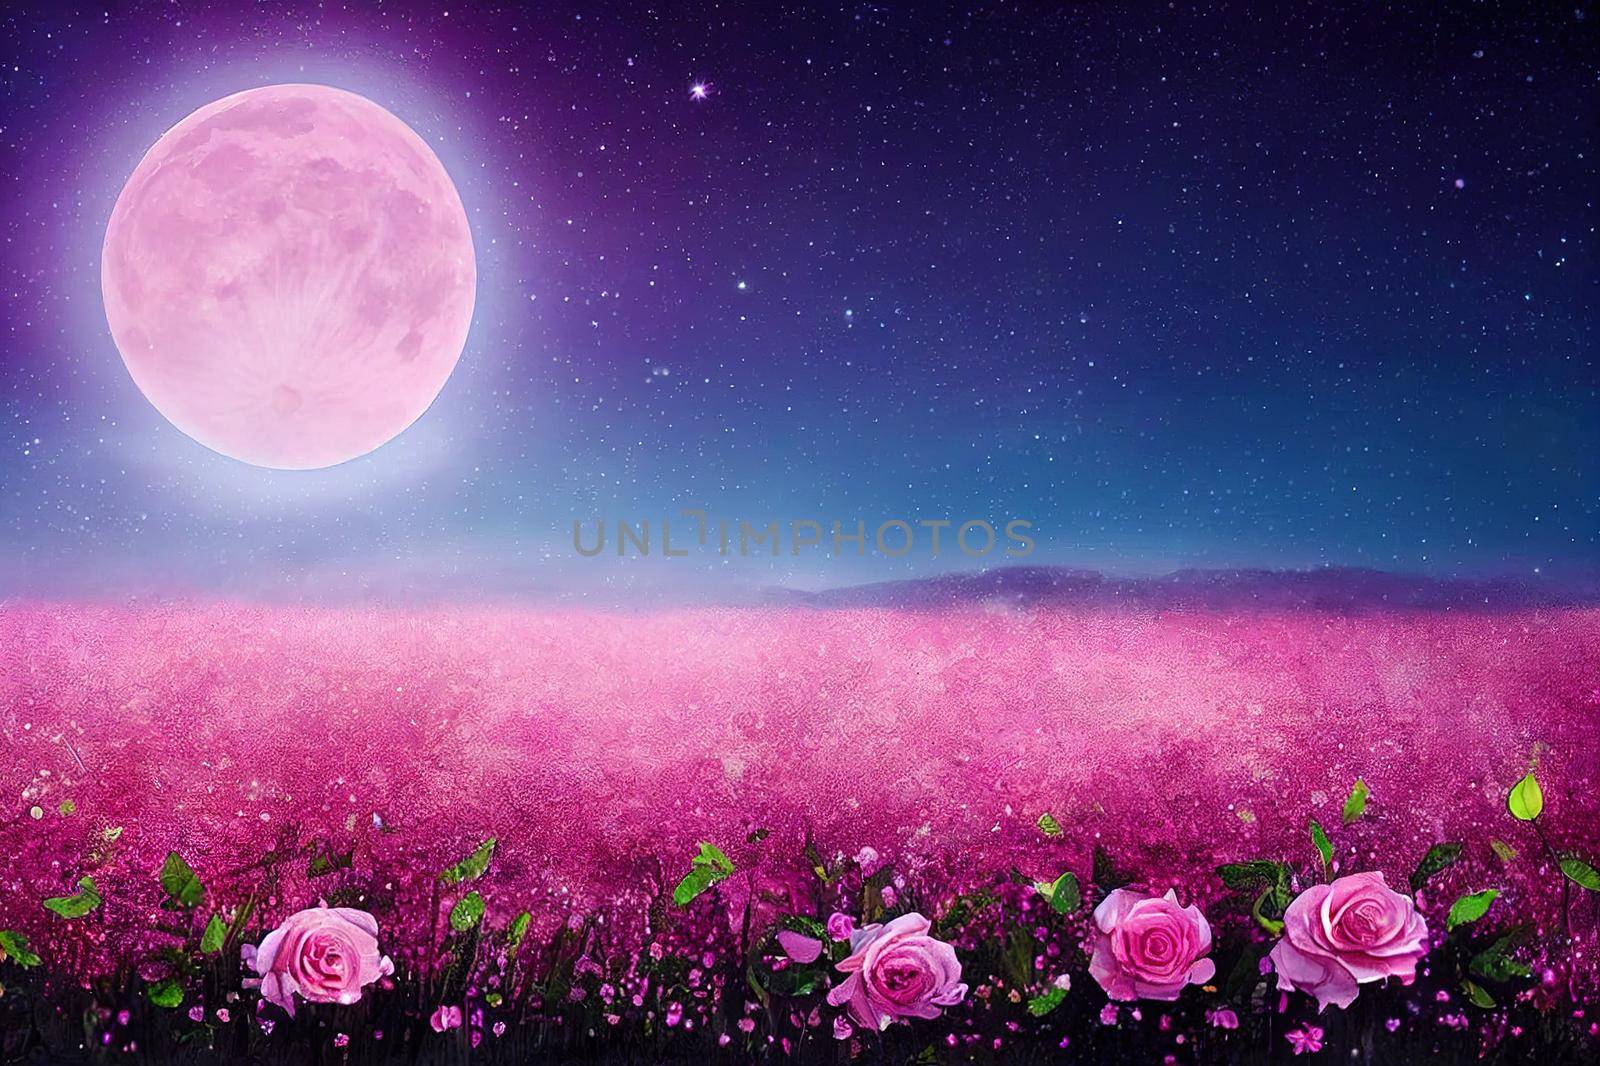 Magical fantasy enchanted fairy tale landscape with fabulous fairytale blooming pink rose flowers by 2ragon